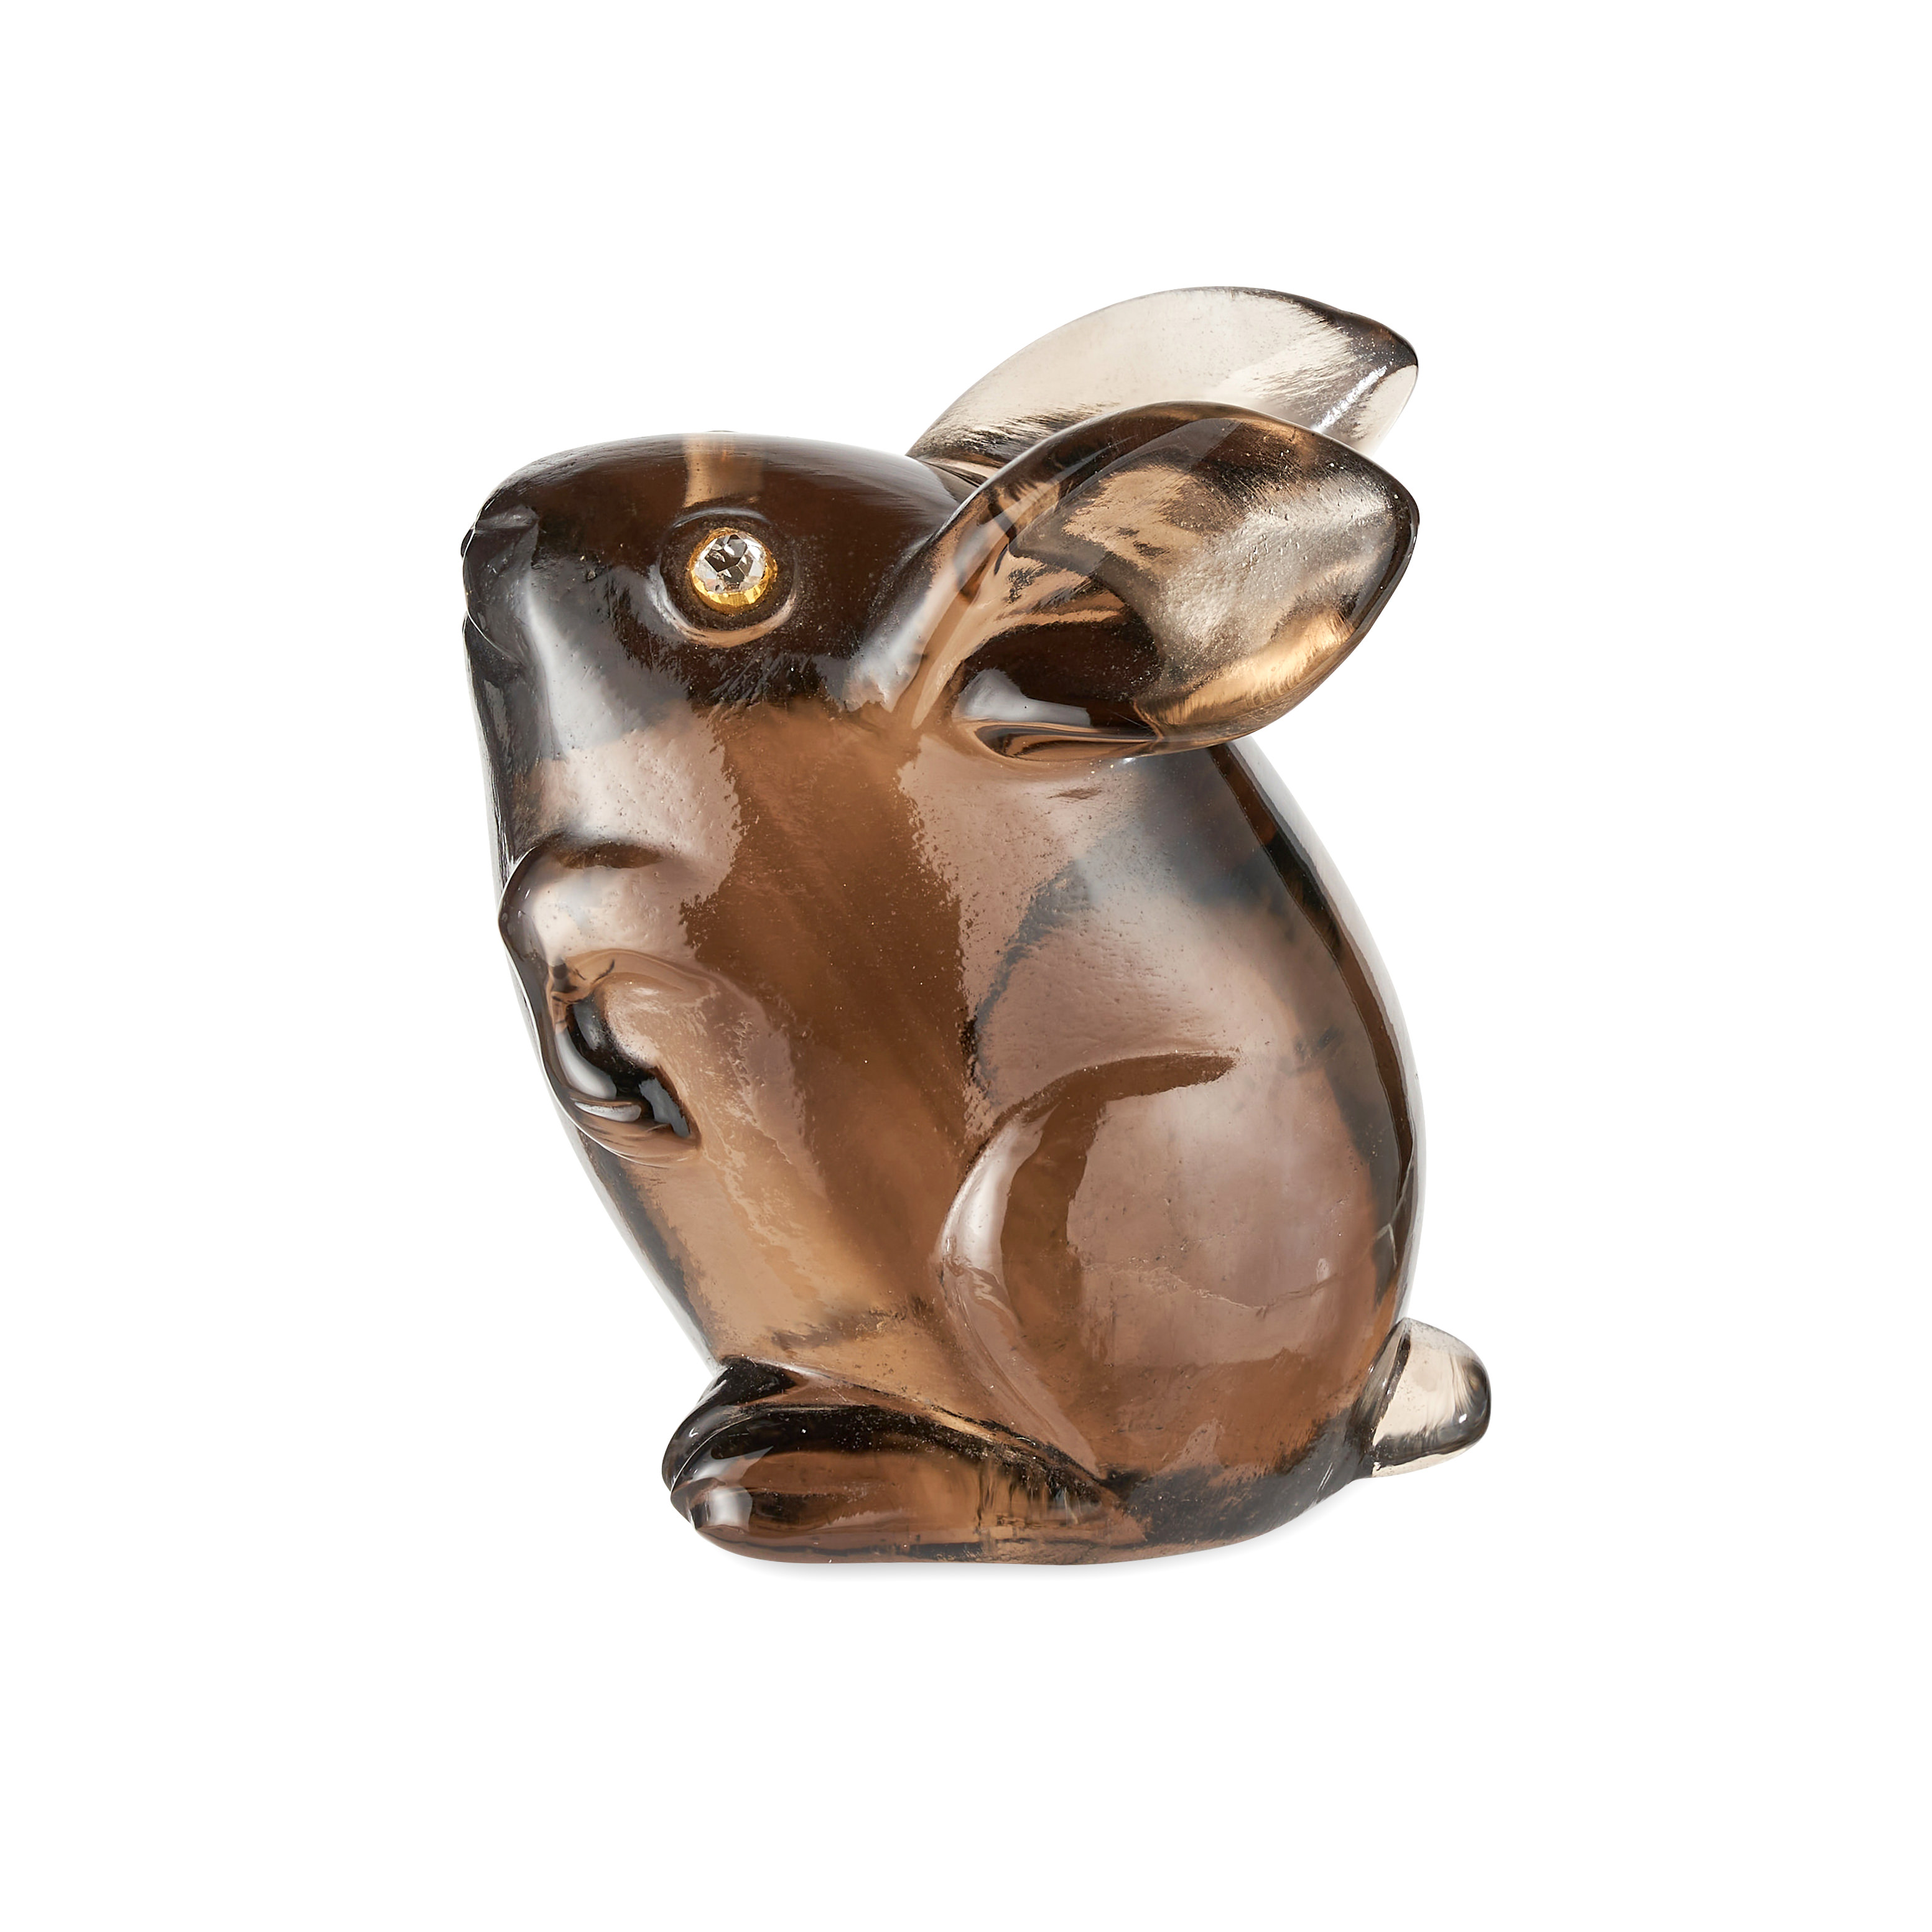 FABERGE, A RARE ROYAL JEWELLED GOLD MOUNTED SMOKEY QUARTZ MODEL OF A BUNNY RABBIT, ST PETERSBURG ... - Image 2 of 9